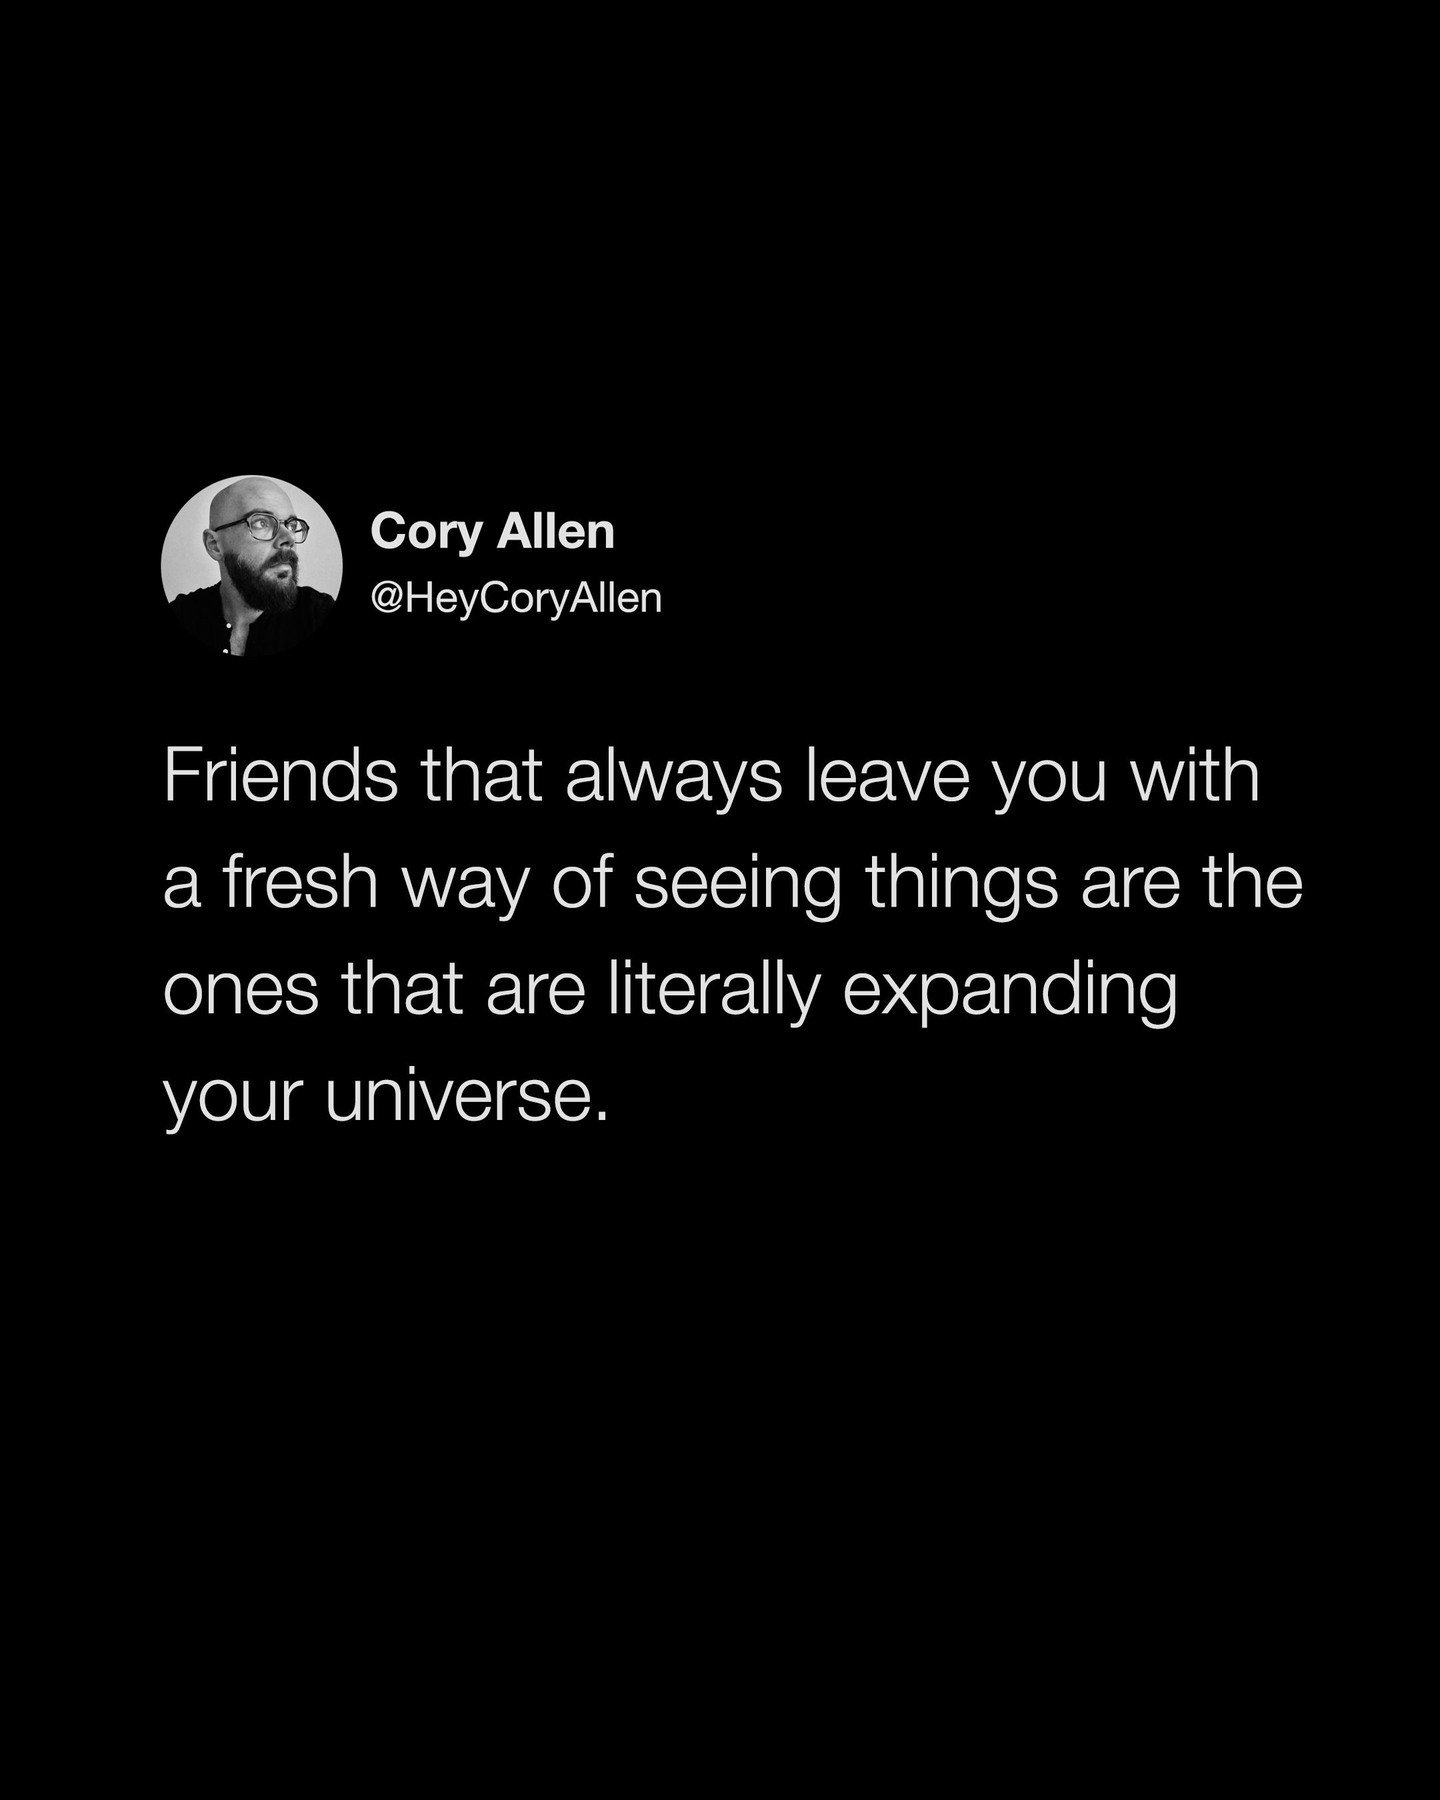 Show your friends some love in the comments 🖤

@heycoryallen: Friends that always leave you with a fresh way of seeing things are the ones that are literally expanding your universe.